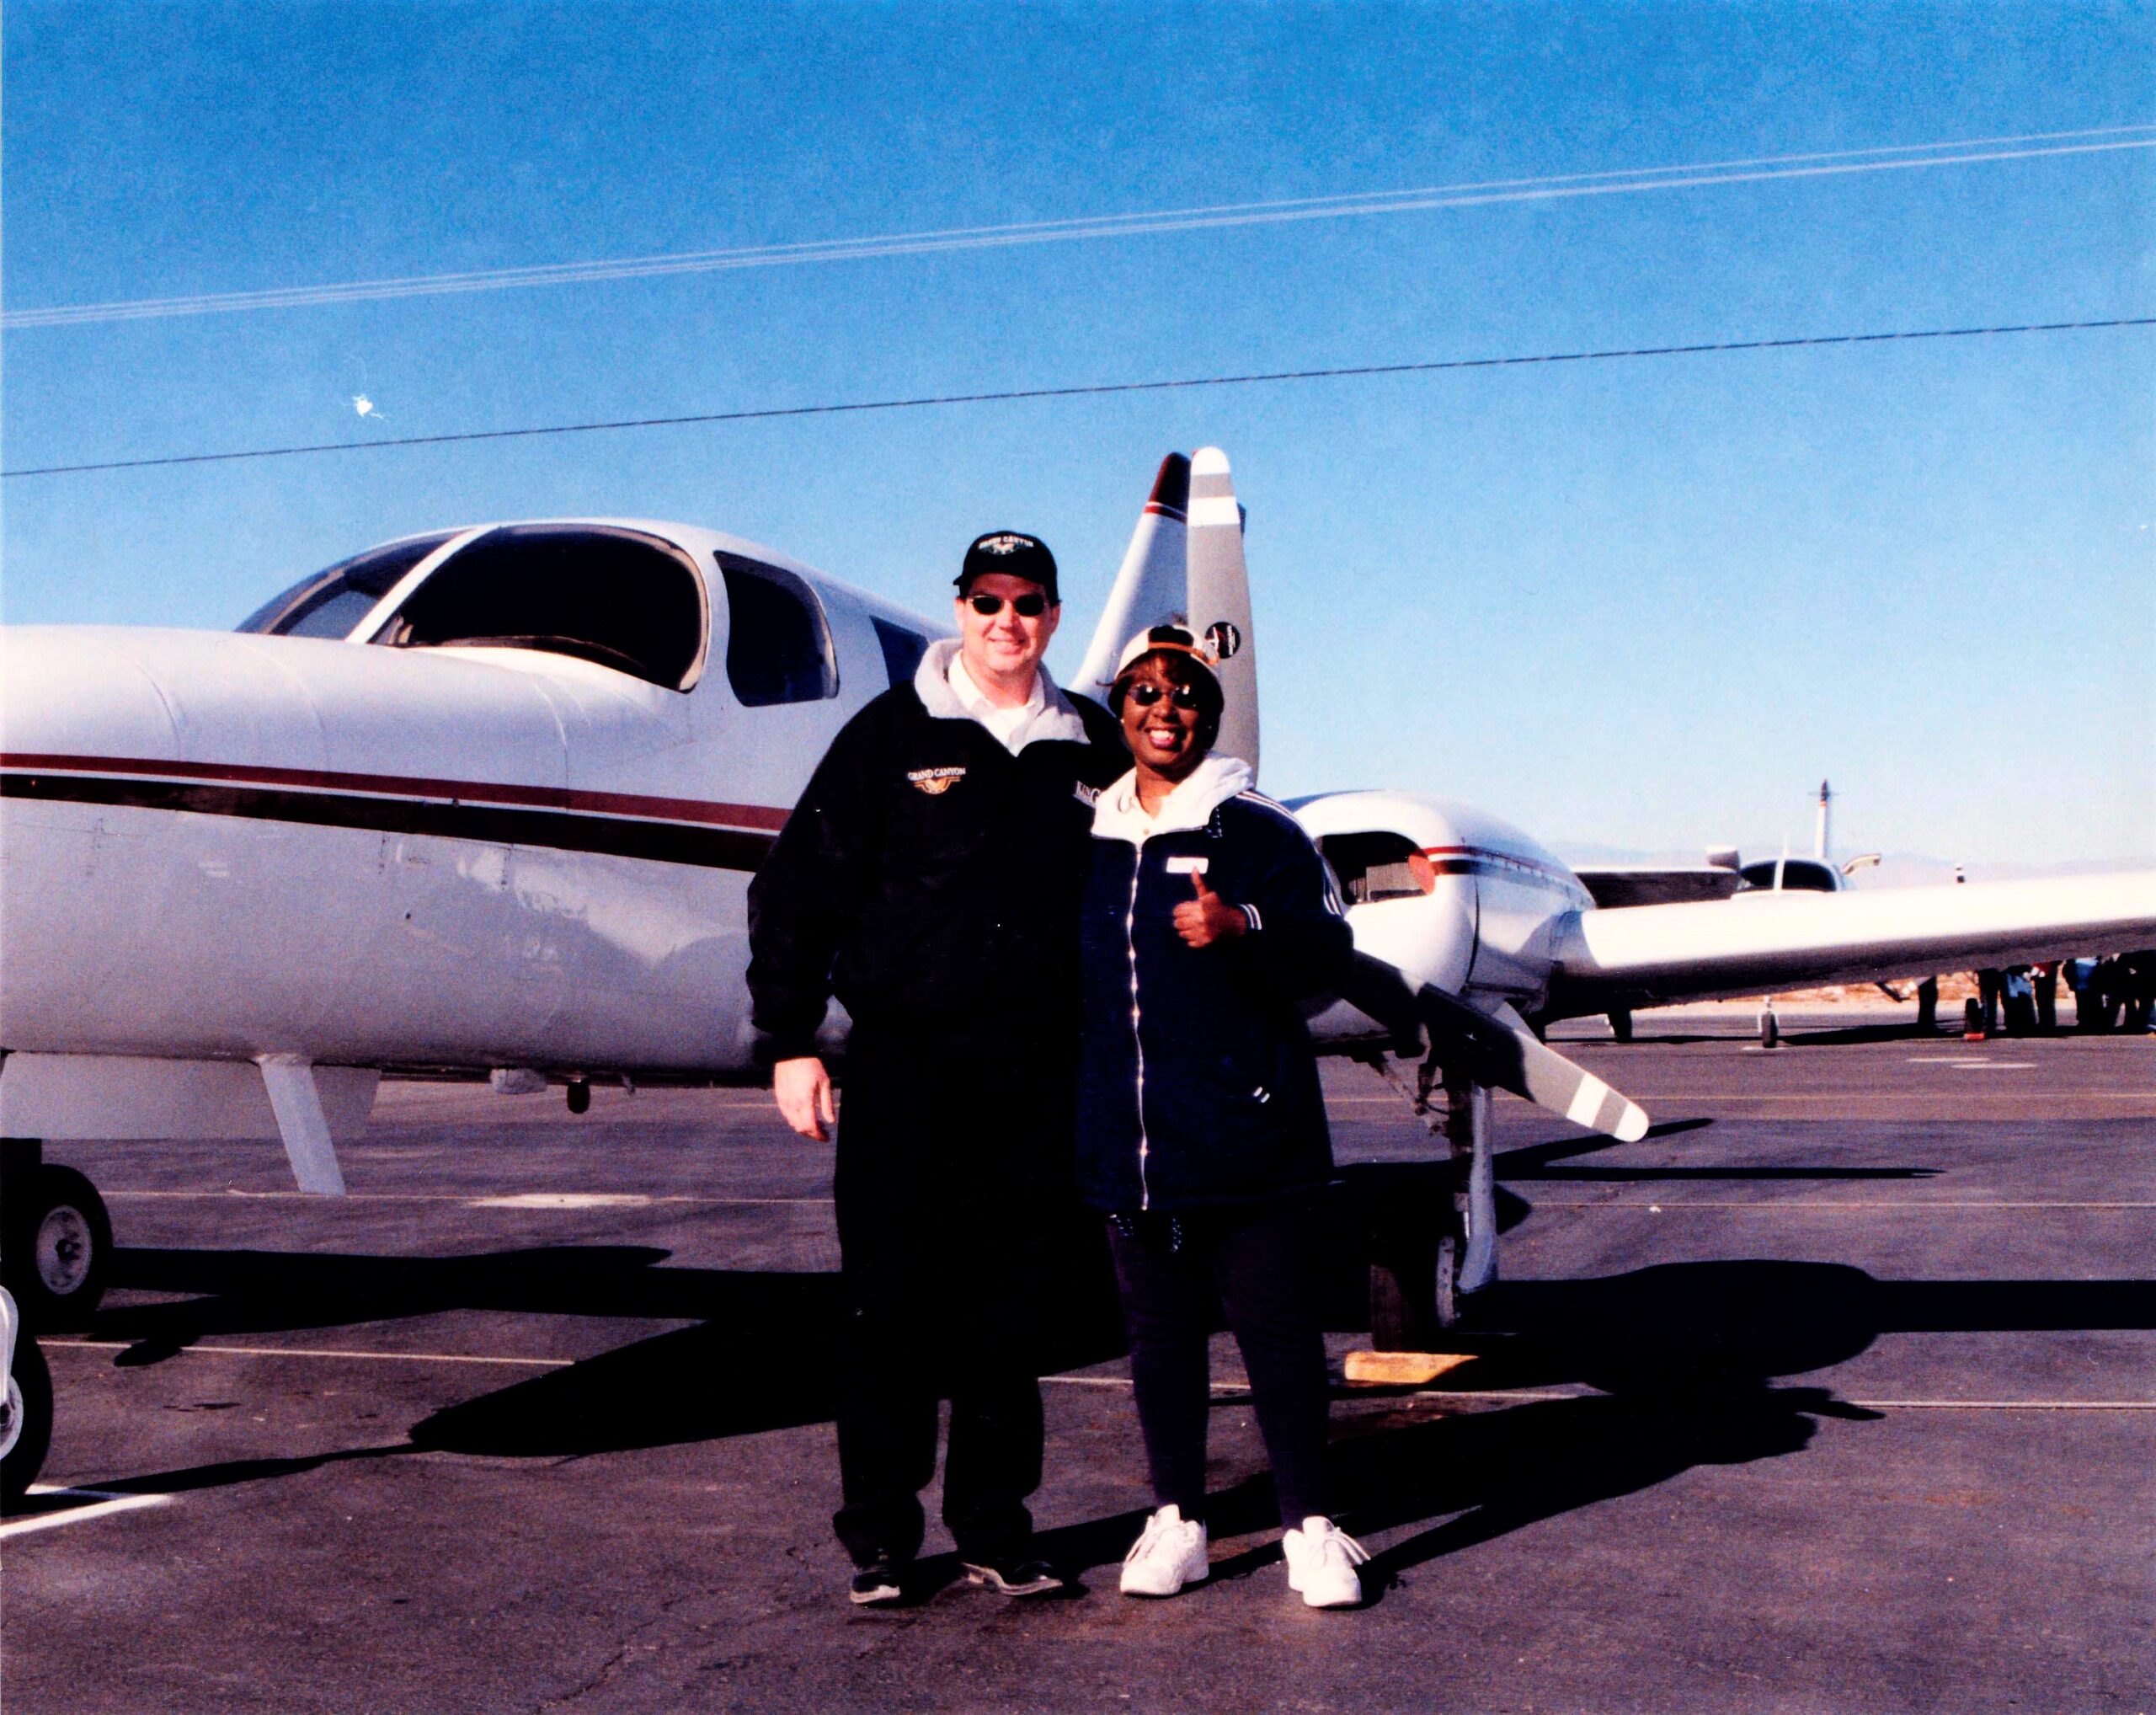 DaniLew as co-pilot on Las Vegas to Grand Canyon flight on the Slow Traveling Soul Sister blog